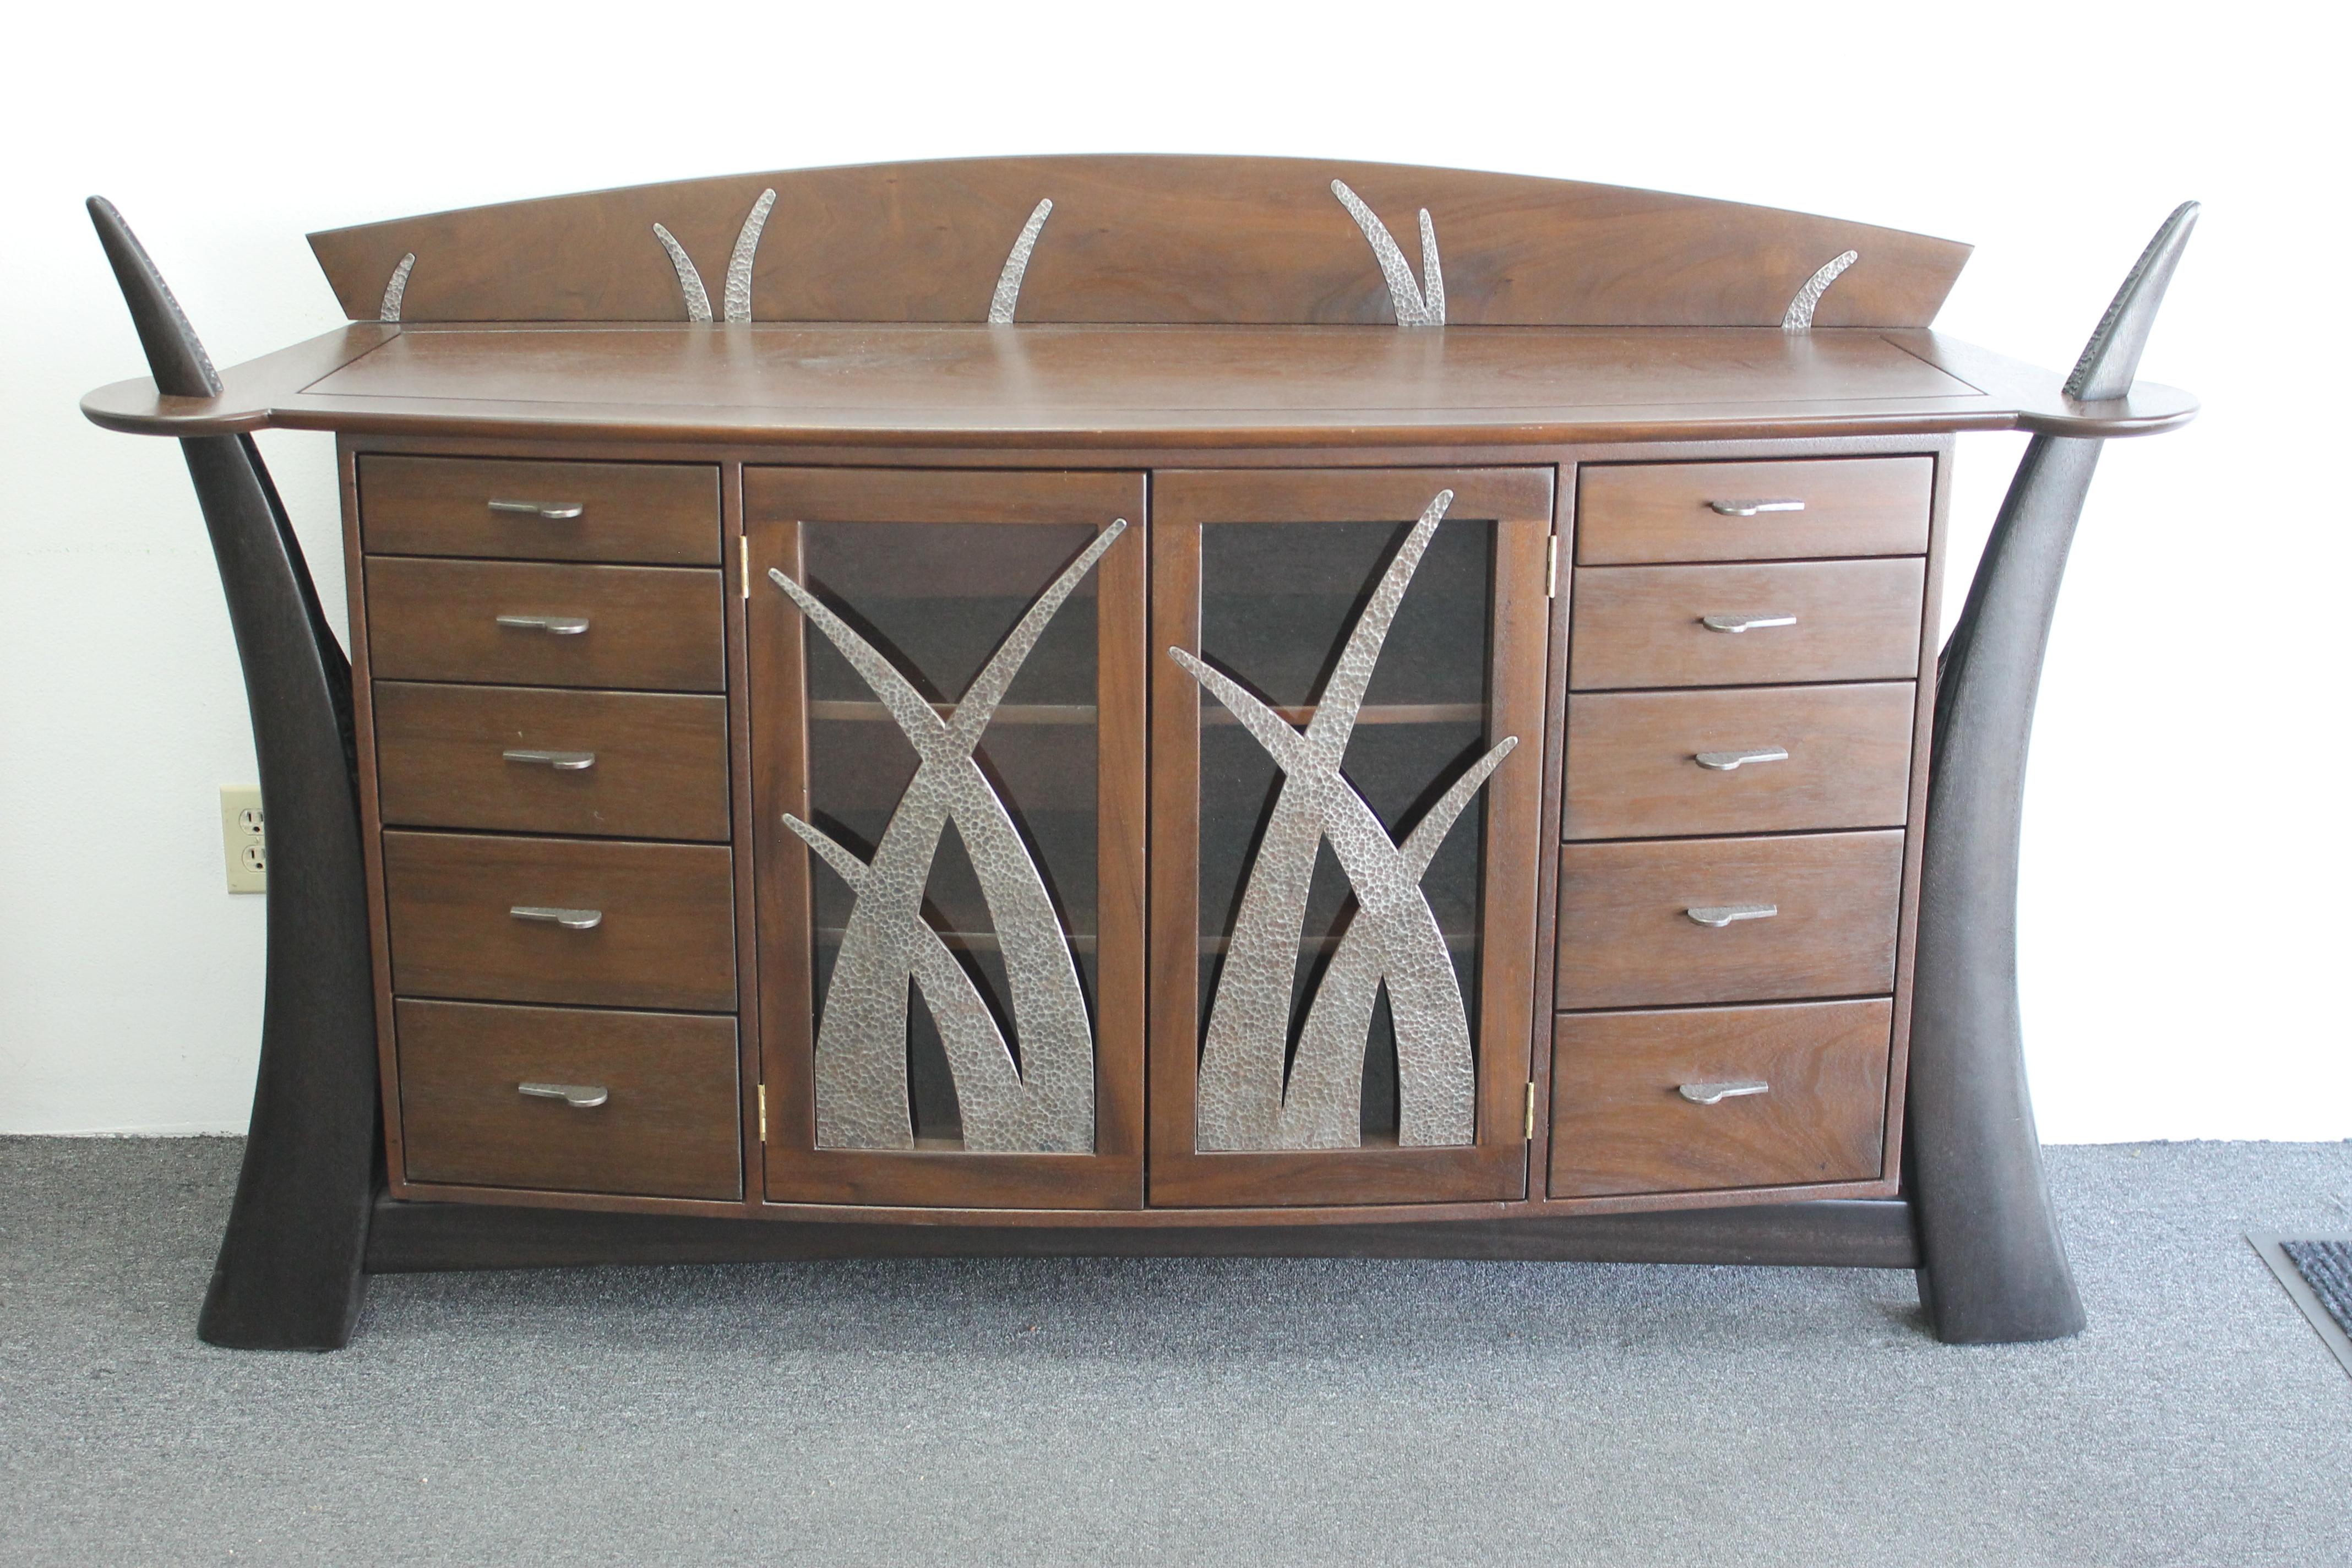 An impressive one-of-a-kind custom built sideboard featuring dramatic tusk shaped 